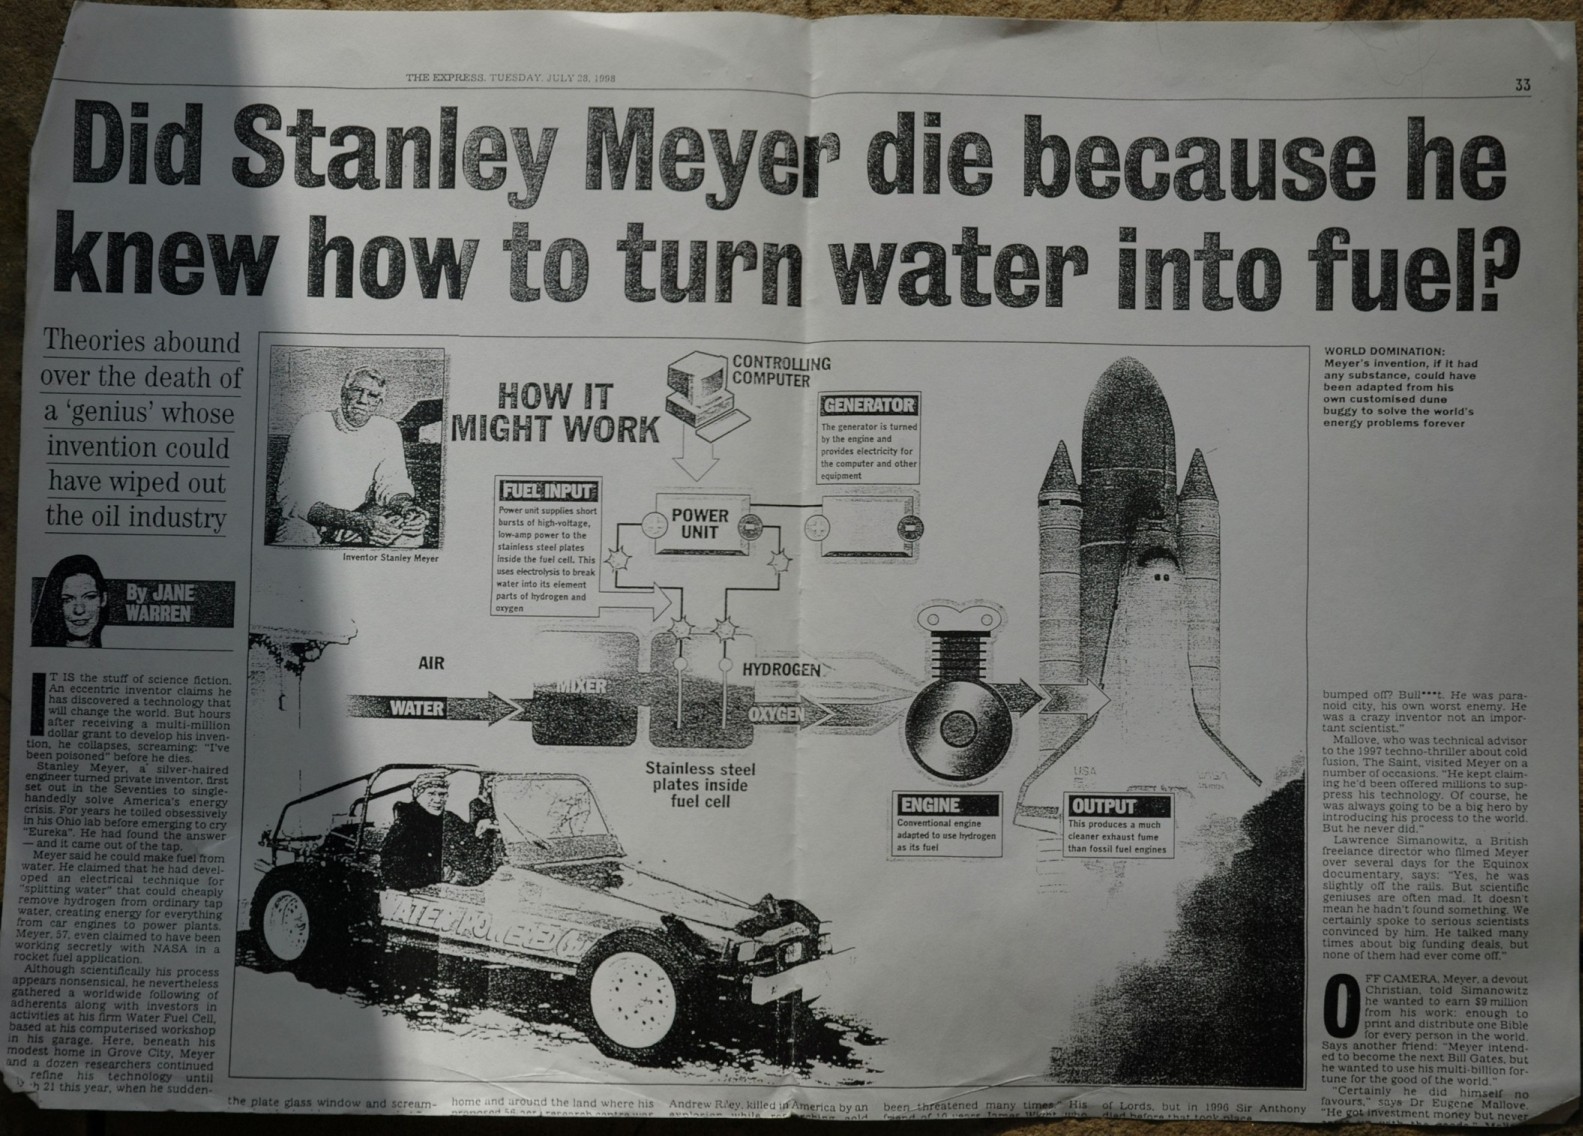 The uncanny death of Stanley Meyer and his Water powered Automobile